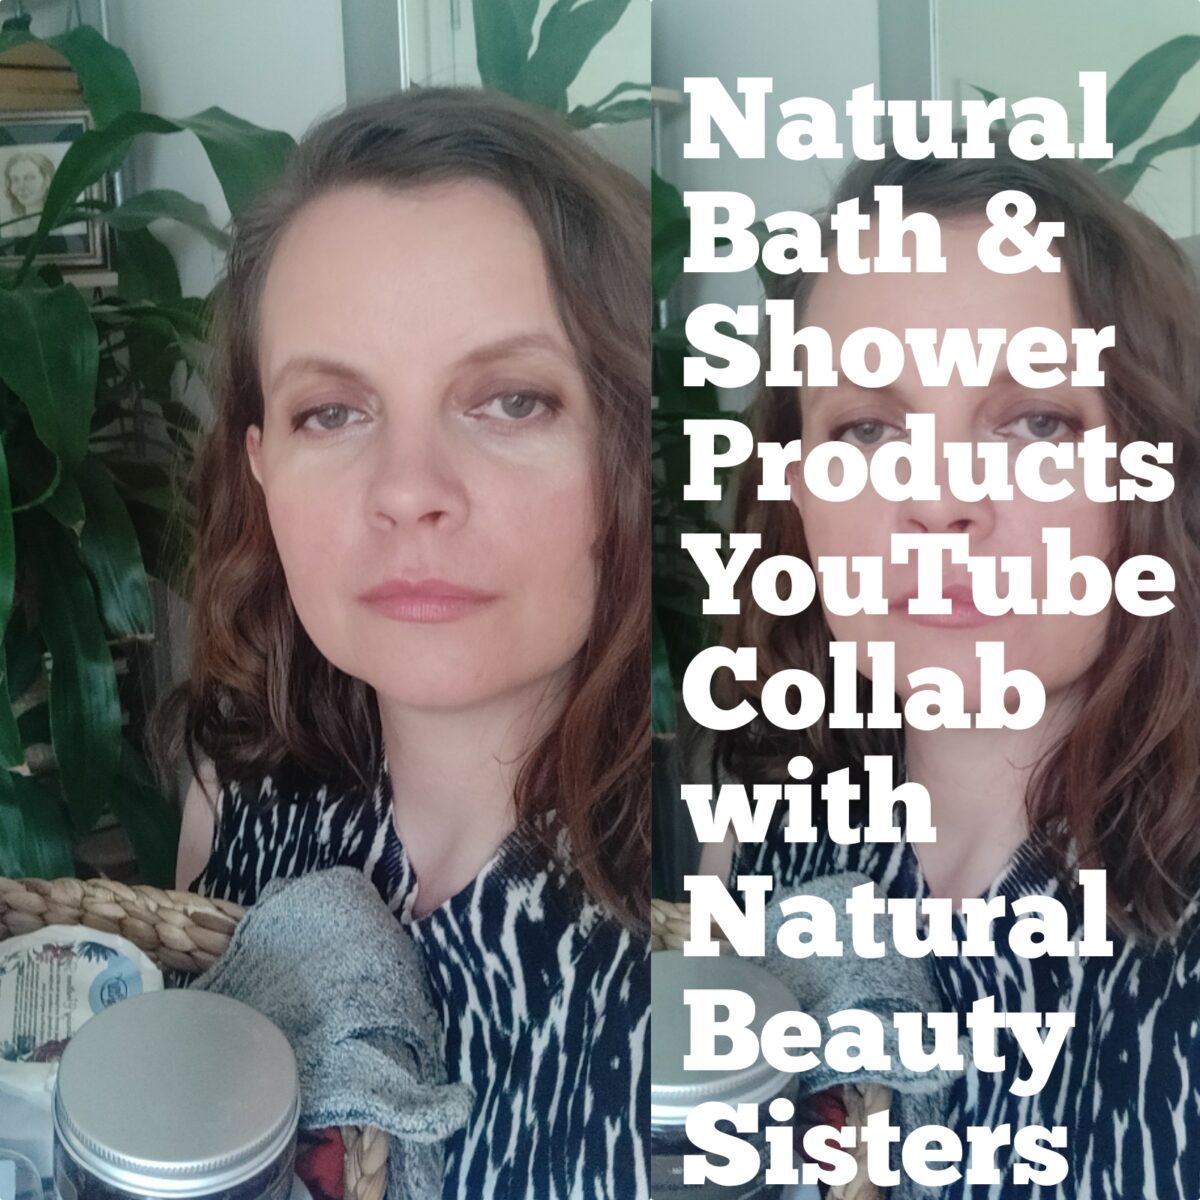 My natural bath & shower products - Green Life In Dublin